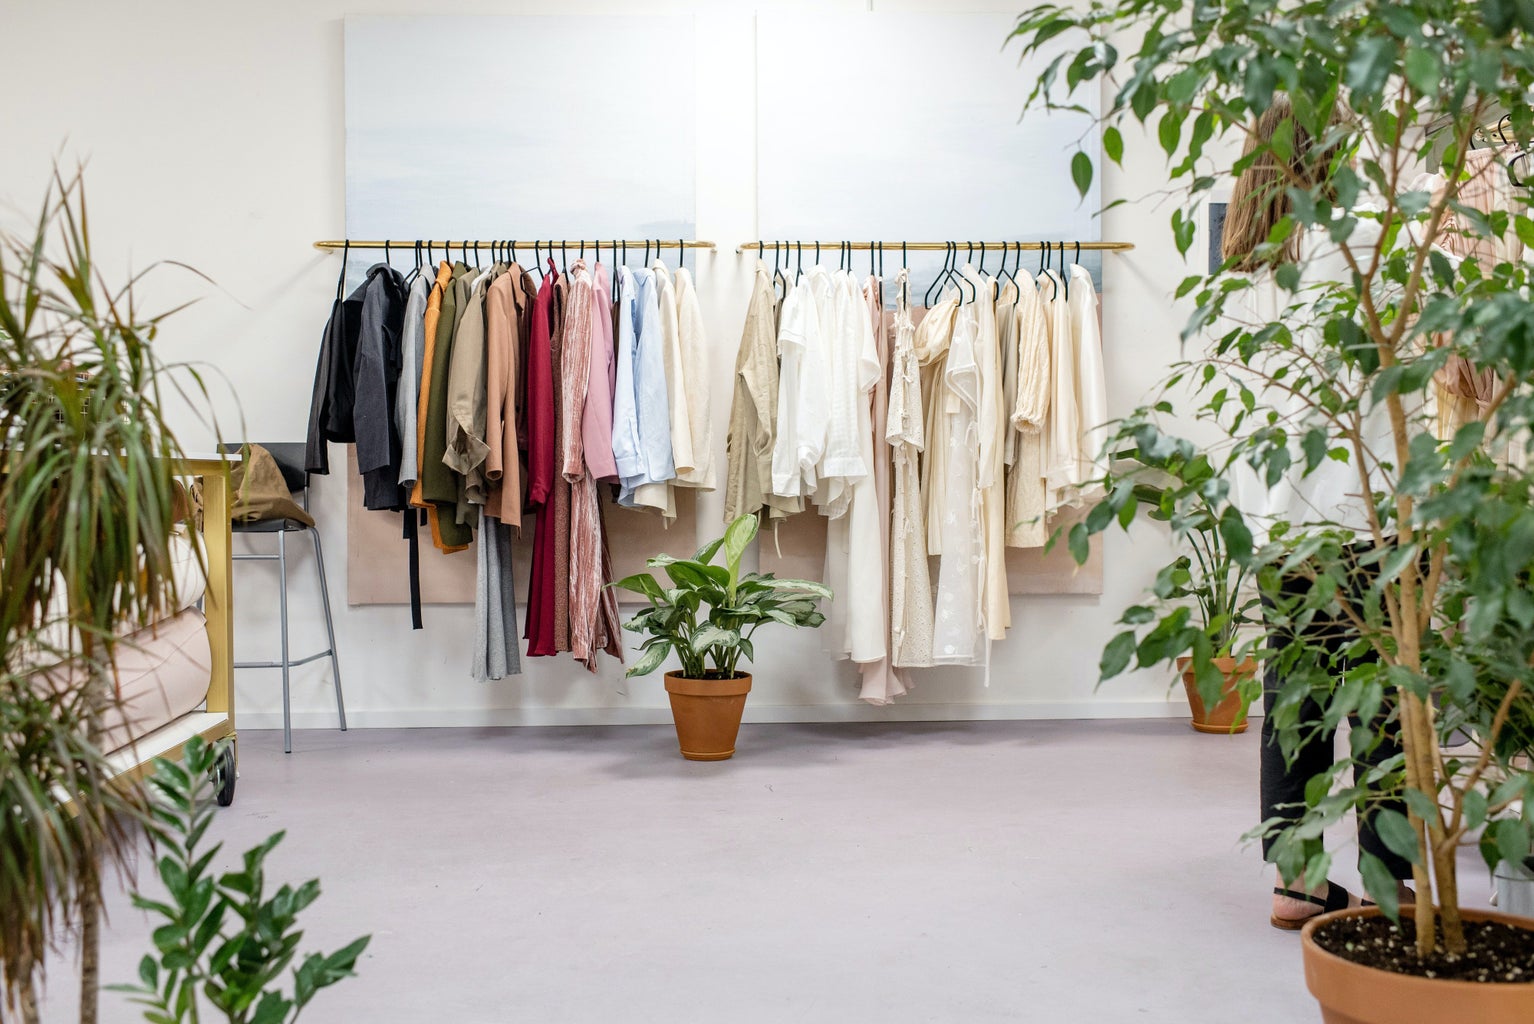 Clothing hangs on a rack with plants on the sides.